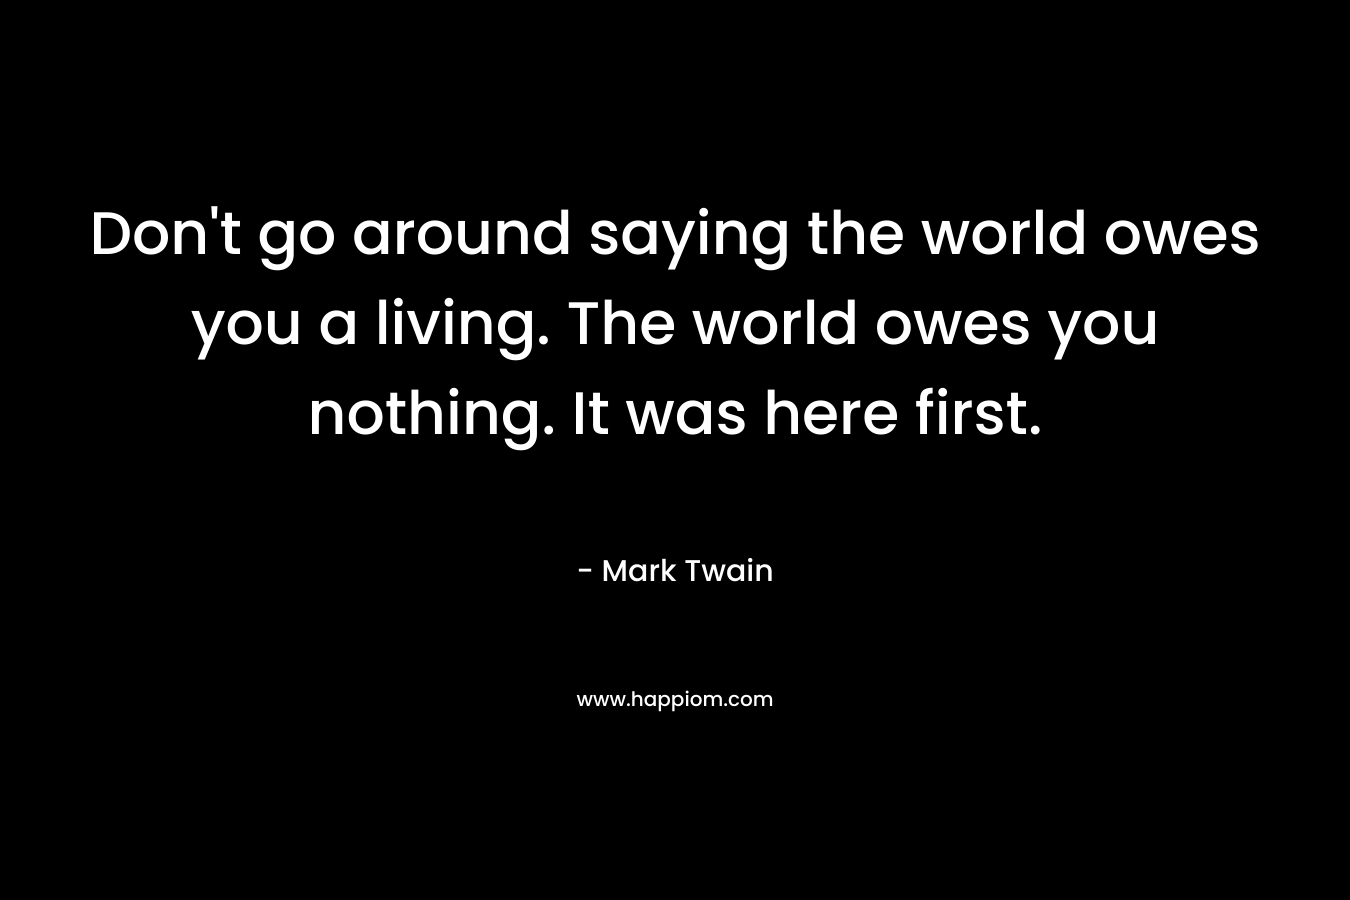 Don’t go around saying the world owes you a living. The world owes you nothing. It was here first. – Mark Twain